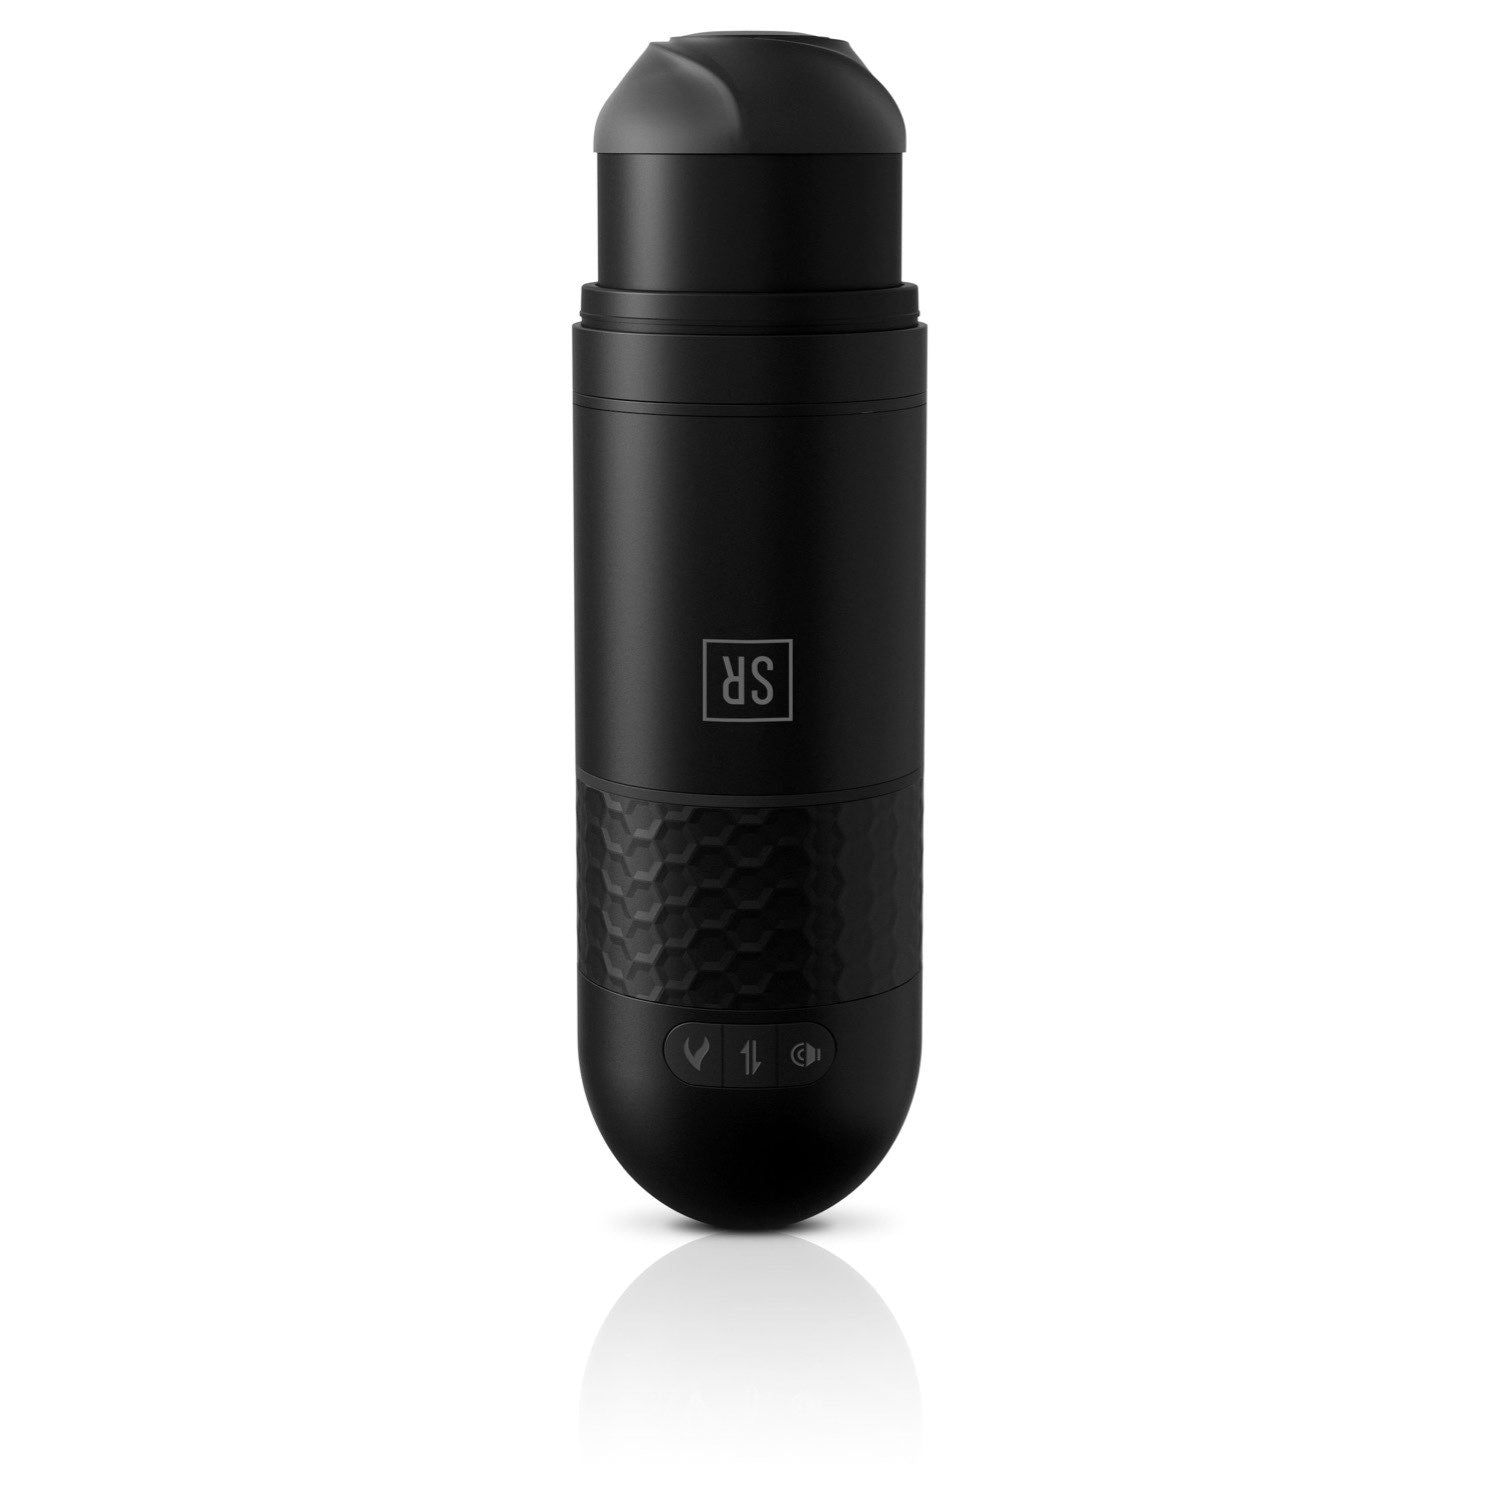 Sir Richards Control Power-Bator - USB Rechargeable Thrusting &amp; Heating Masturbator with Audio by Pipedream